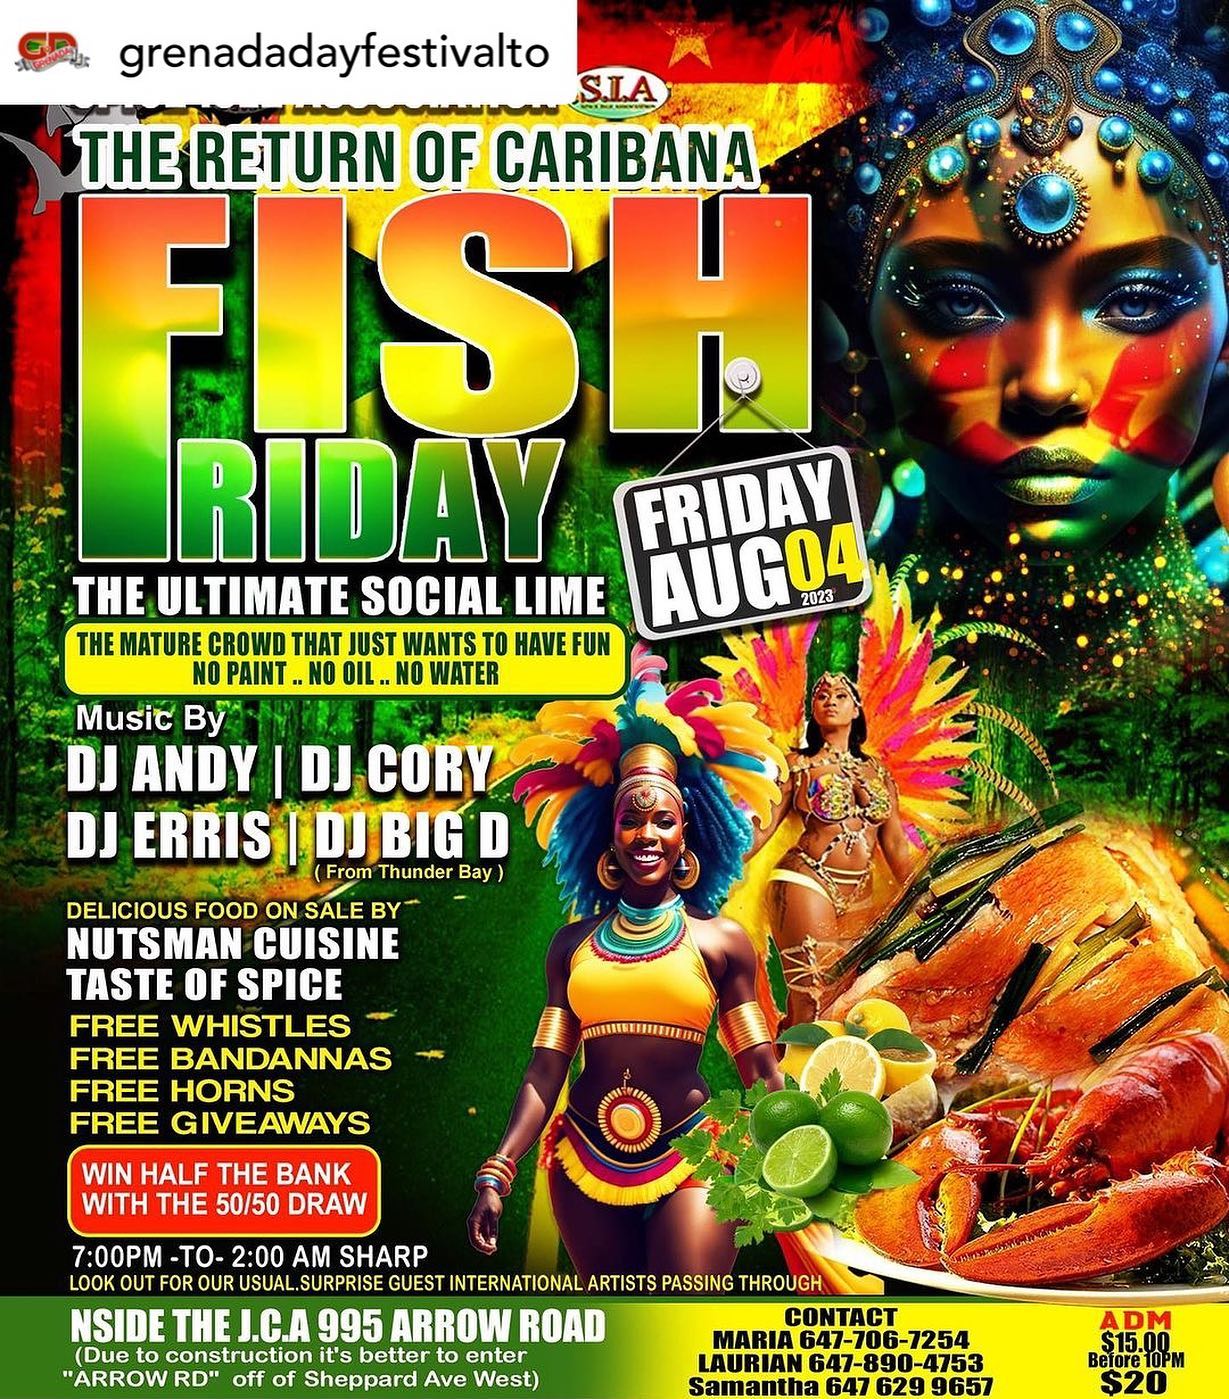 THE MATURE CROWD THAT JUST WANTS TO HAVE FUN ... NO PAINT ... NO OIL ... NO WATER .. NO POWDER .... A Variety of Great Music .. Spice Isle Association Presents  THE ULTIMATE SOCIAL LIME - CARIBANA  FISH FRIDAY .. Friday August 4th - Inside The J.C.A ( Large Hall ) .. Delicious Food On Sale By "Nutsman Cuisine" And "Taste Of Spice" ... AS USUAL WE HAVE SURPRISE INTERNATIONAL GUESTS ARTISTS PASSING THROUGH TO MEET AND GREET .. Free Whistles... Free àBandana's .. Free Horns ... For The First Set Of People ... Chance to win half the bank in our 50/50 Raffle - $15.00 Before 10pm and $20.00 after ... Music will be Sooooooo Sweet .. the 
.Best Dj's  that know how to make the Mature Crowd have fun ... SREAD THE WORD AROUND ... YOU WILL SEE ME THERE